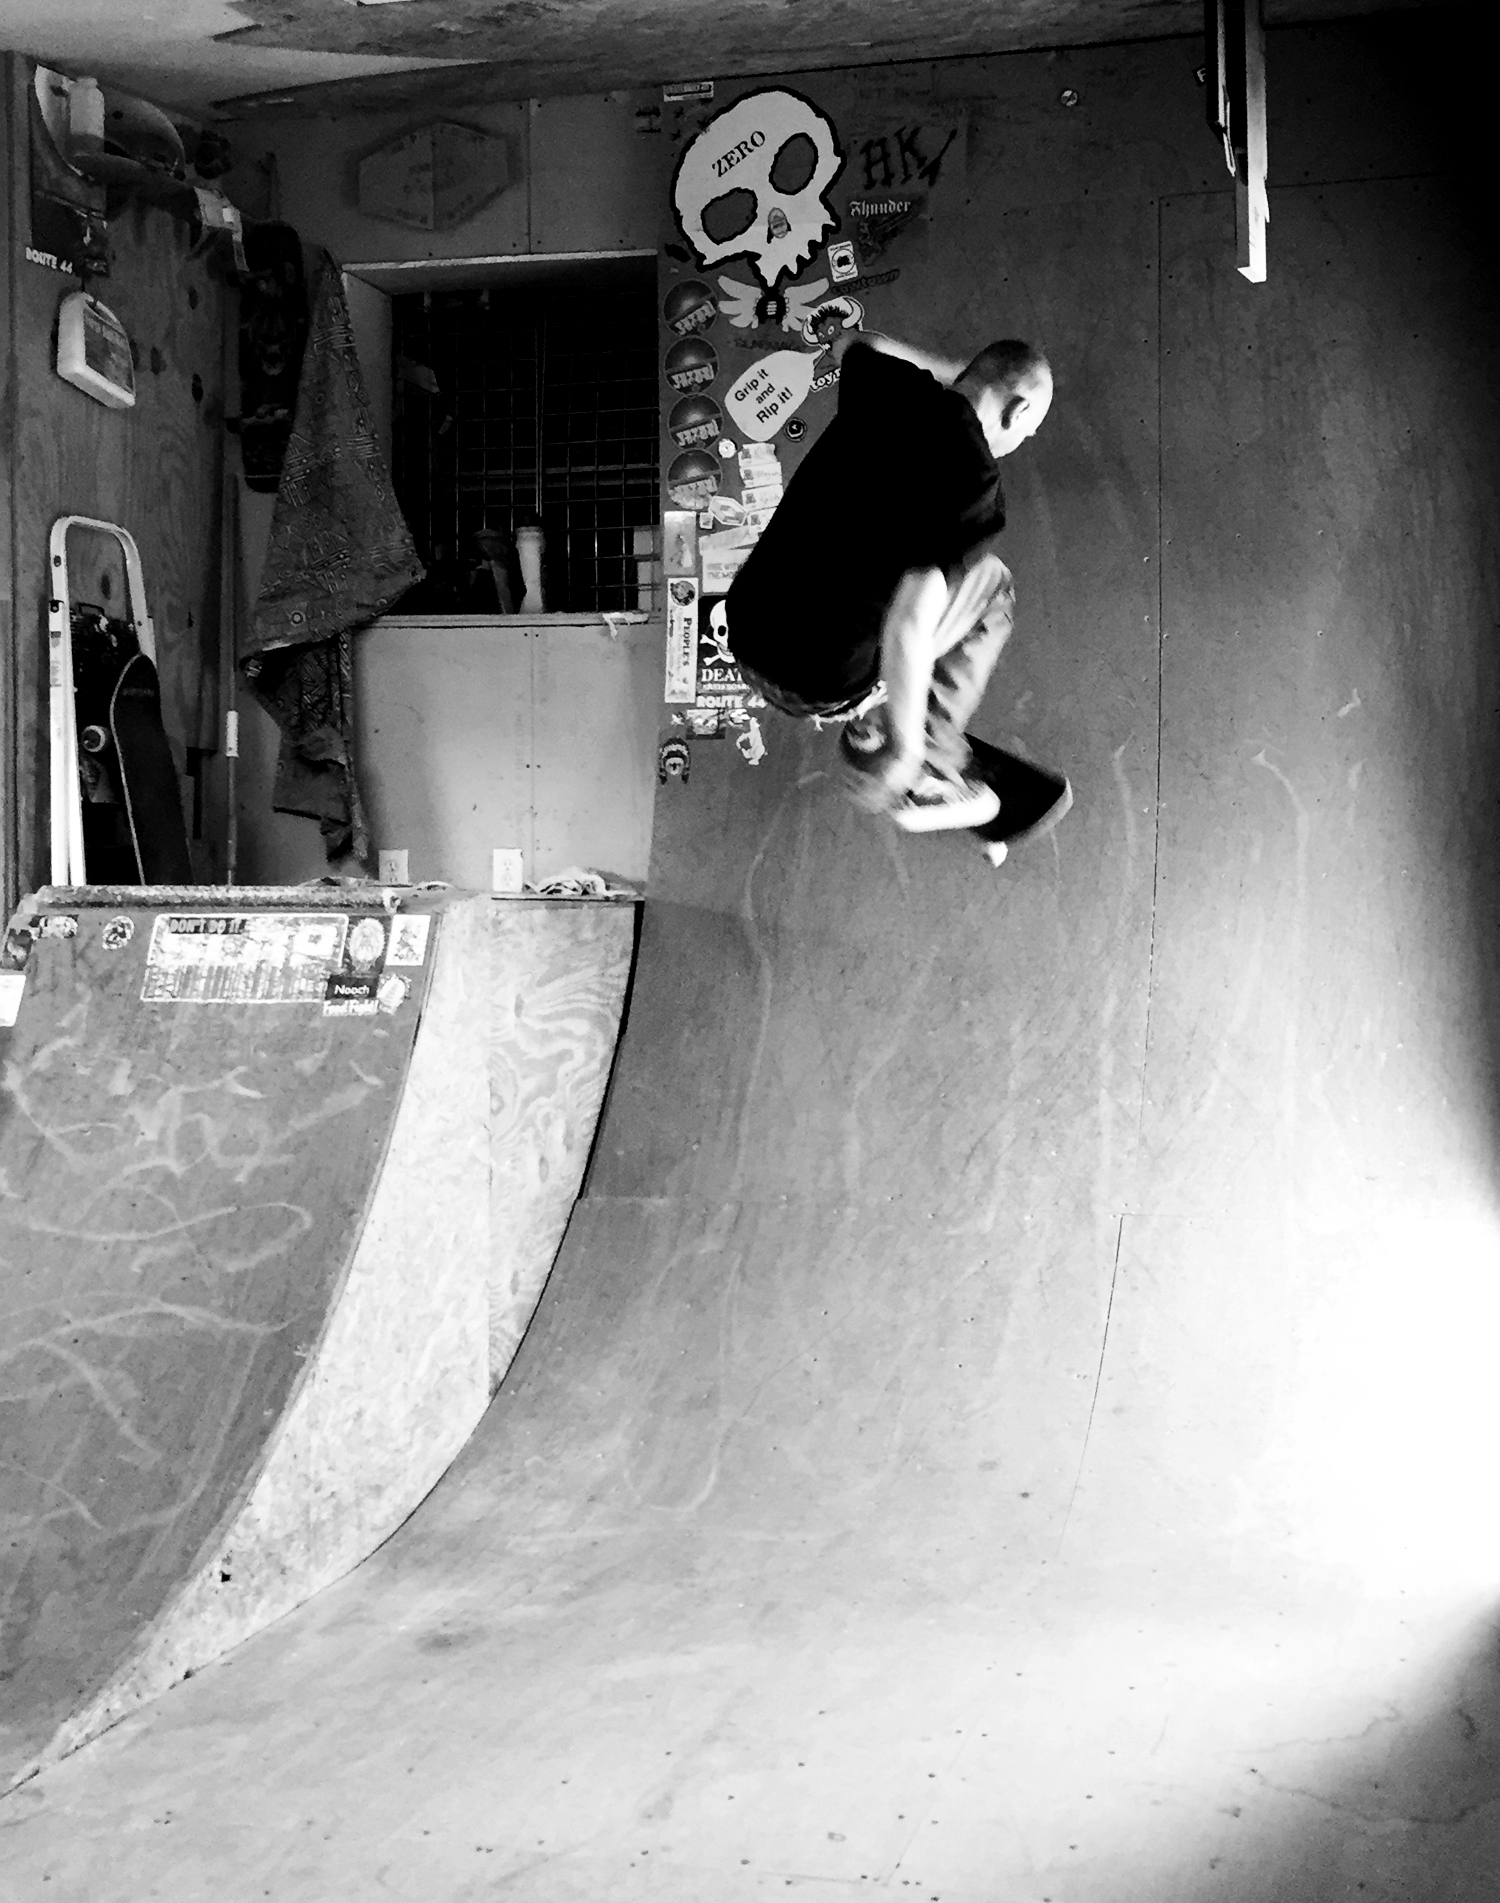 Joey Young, pop shuv fakie